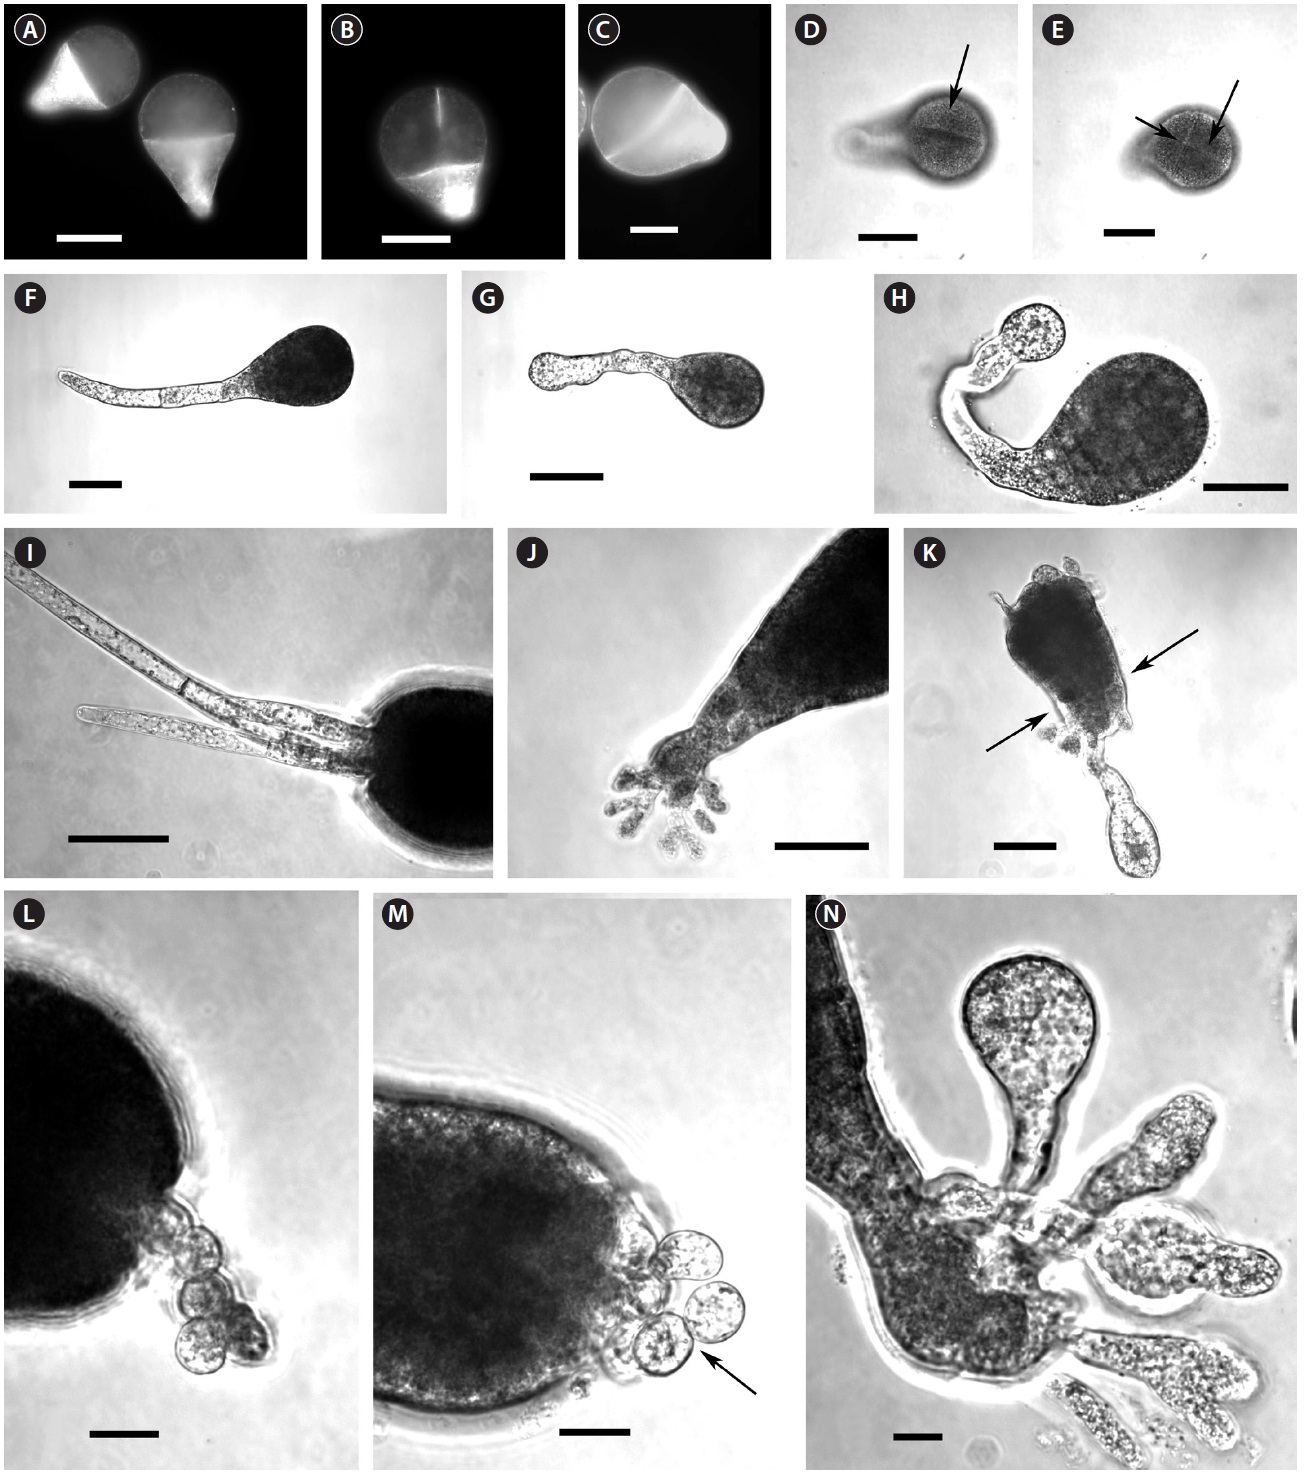 Developing embryos of Fucus vesiculosus. (A & B) 24 h control embryos with one (A) or two (B) whole or partial cell divisions stained with FM4-64 and showing bright membrane concentrations at rhizoid tip and along cell plates. (C) GeO2 treated 24 h embryo stained with FM4-64 showing oblique division. (D) GeO2 treated 24 h embryo showing oblique first division. (E) GeO2 treated 24 h embryo showing oblique first division (short arrow) and subsequent division of thallus cell perpendicular to the first (long arrow). (F) Control embryo at 4 days showing normal development of rhizoid and thallus. (G) GeO2 treated embryo at 4 days showing rhizoid with inflated tip. (H) GeO2 treated embryo at 4 days showing hook-shaped rhizoid with inflated tip. (I) Apex of control embryo at 8 days with three normal apical hairs. (J) Base of 8 days control embryo with typical rhizoid development. (K) Whole 8 days GeO2 treated embryo with irregular shape, inflated rhizoid tip, poor development of apical hairs and secondary rhizoid development from thallus base; arrows indicate common point of breakage of GeO2 treated embryos. (L & M) Apex of 8 days GeO2 treated embryo showing the abnormal development of apical hairs. Note the cell disaggregation. (N) Primary and secondary rhizoids of 8 days GeO2 treated embryo showing the inflated tips. Scale bars represent: A-K, 50 μm; L-N, 20 μm.